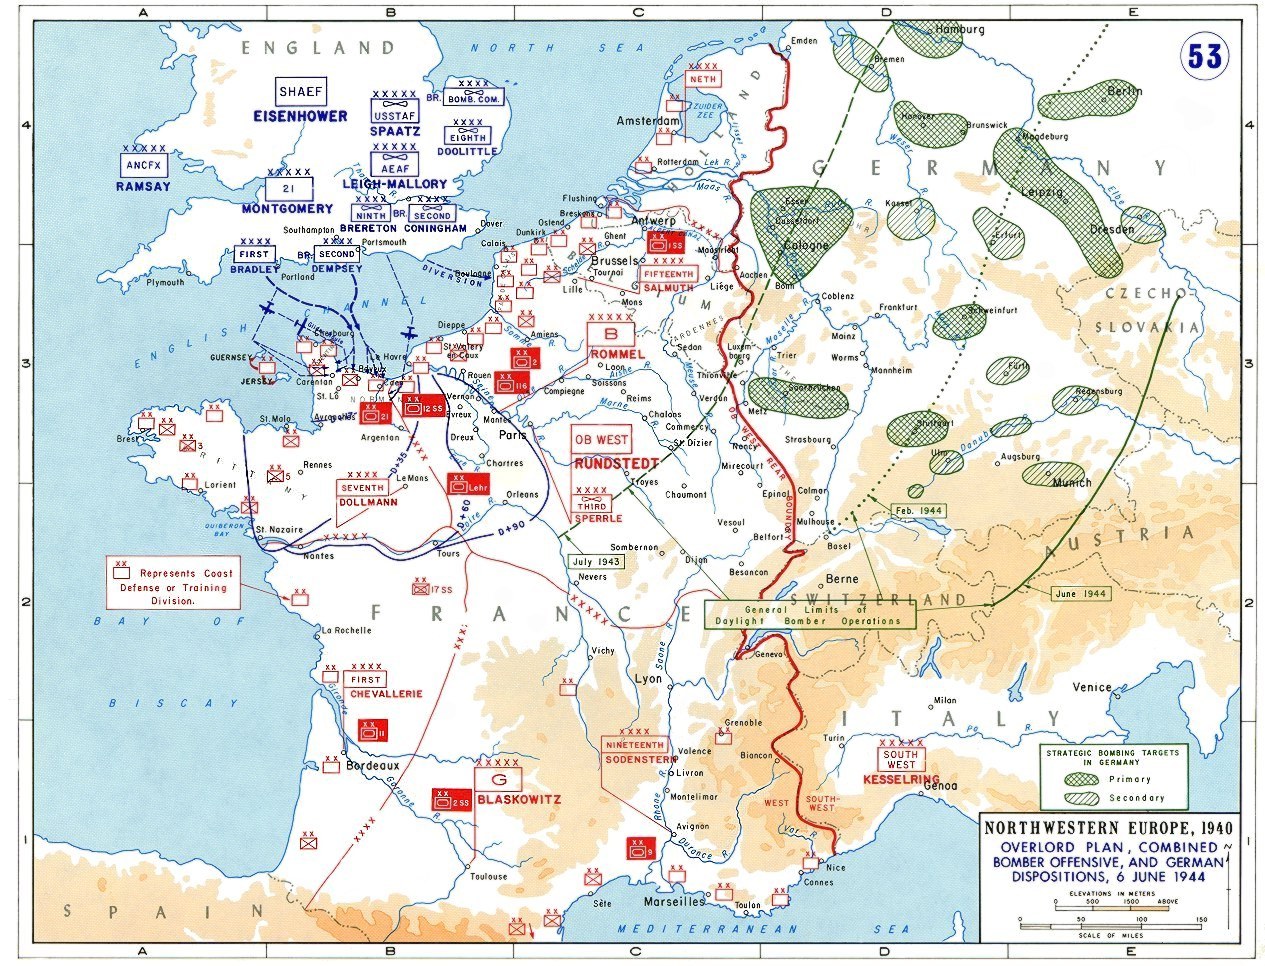 [Map] Map depicting Allied bomber offensive plans in the Normandy